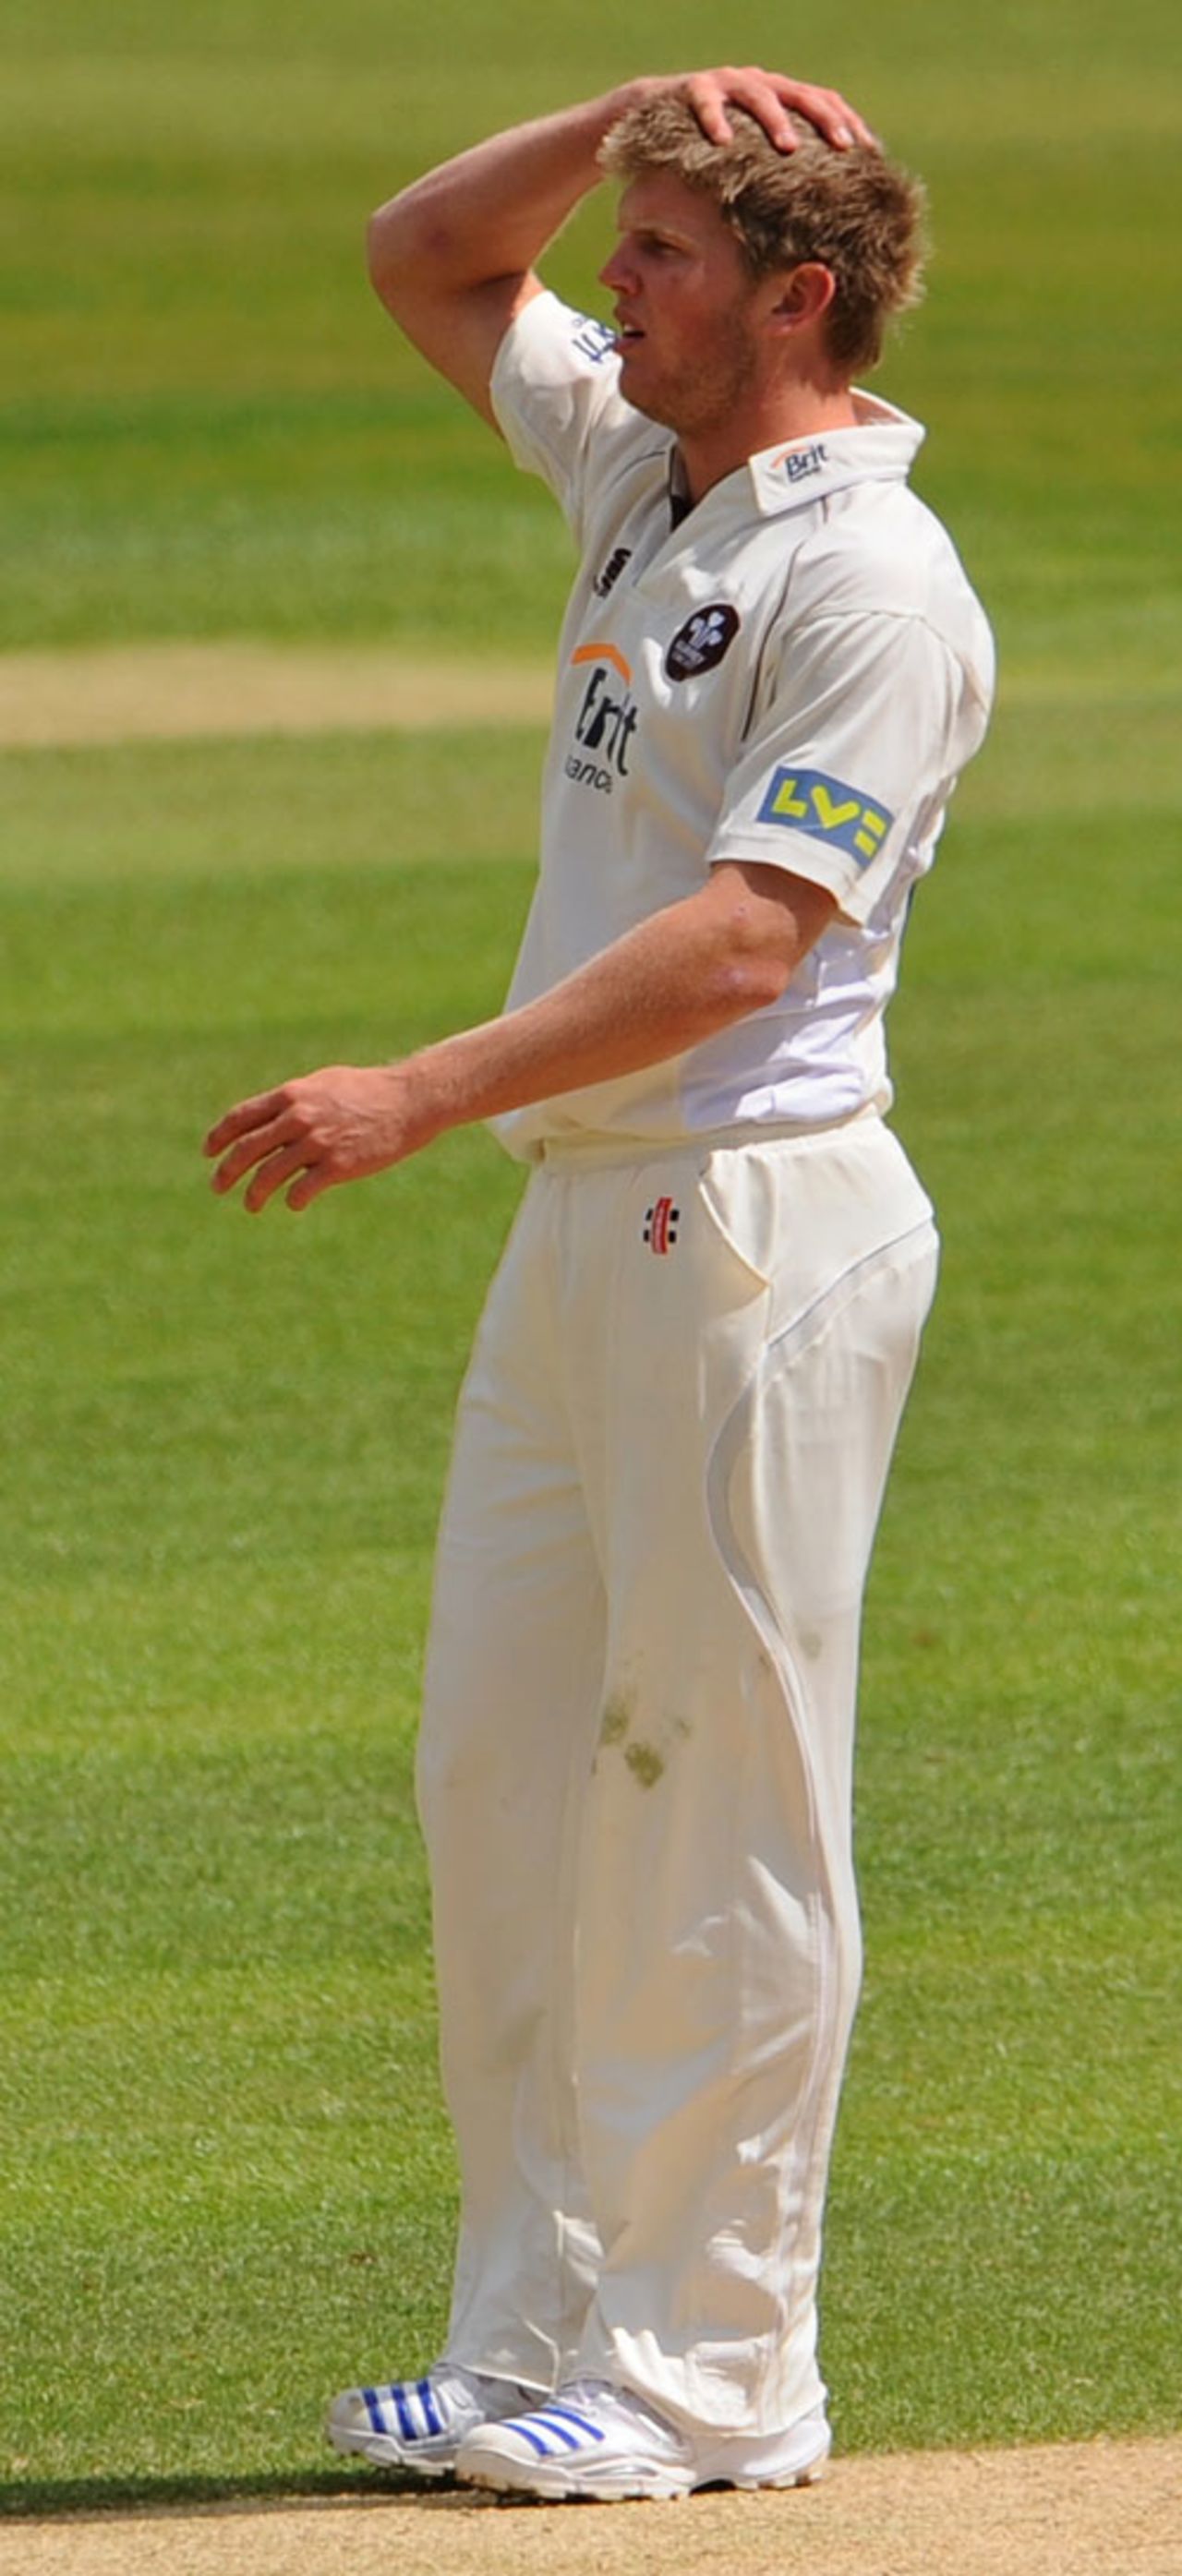 Frustration for Stuart Meaker as Phillip Hughes edges over the slips, Surrey v Middlesex, The Oval, May 6, 2009